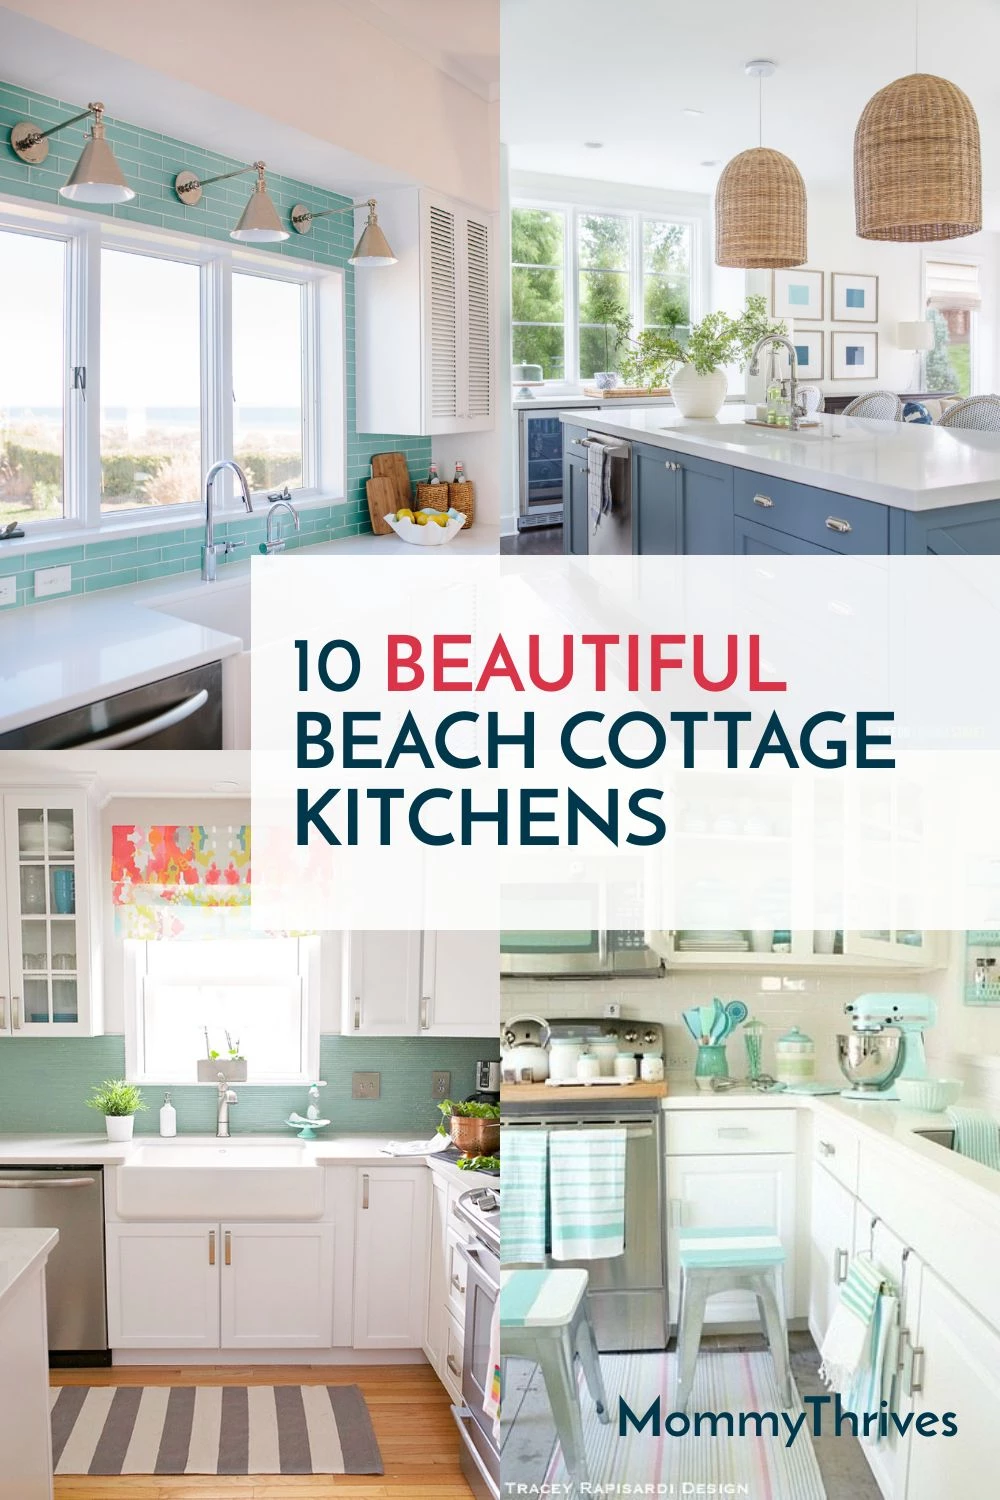 20 Coastal Kitchen Ideas to Bring the Beach to Your Home